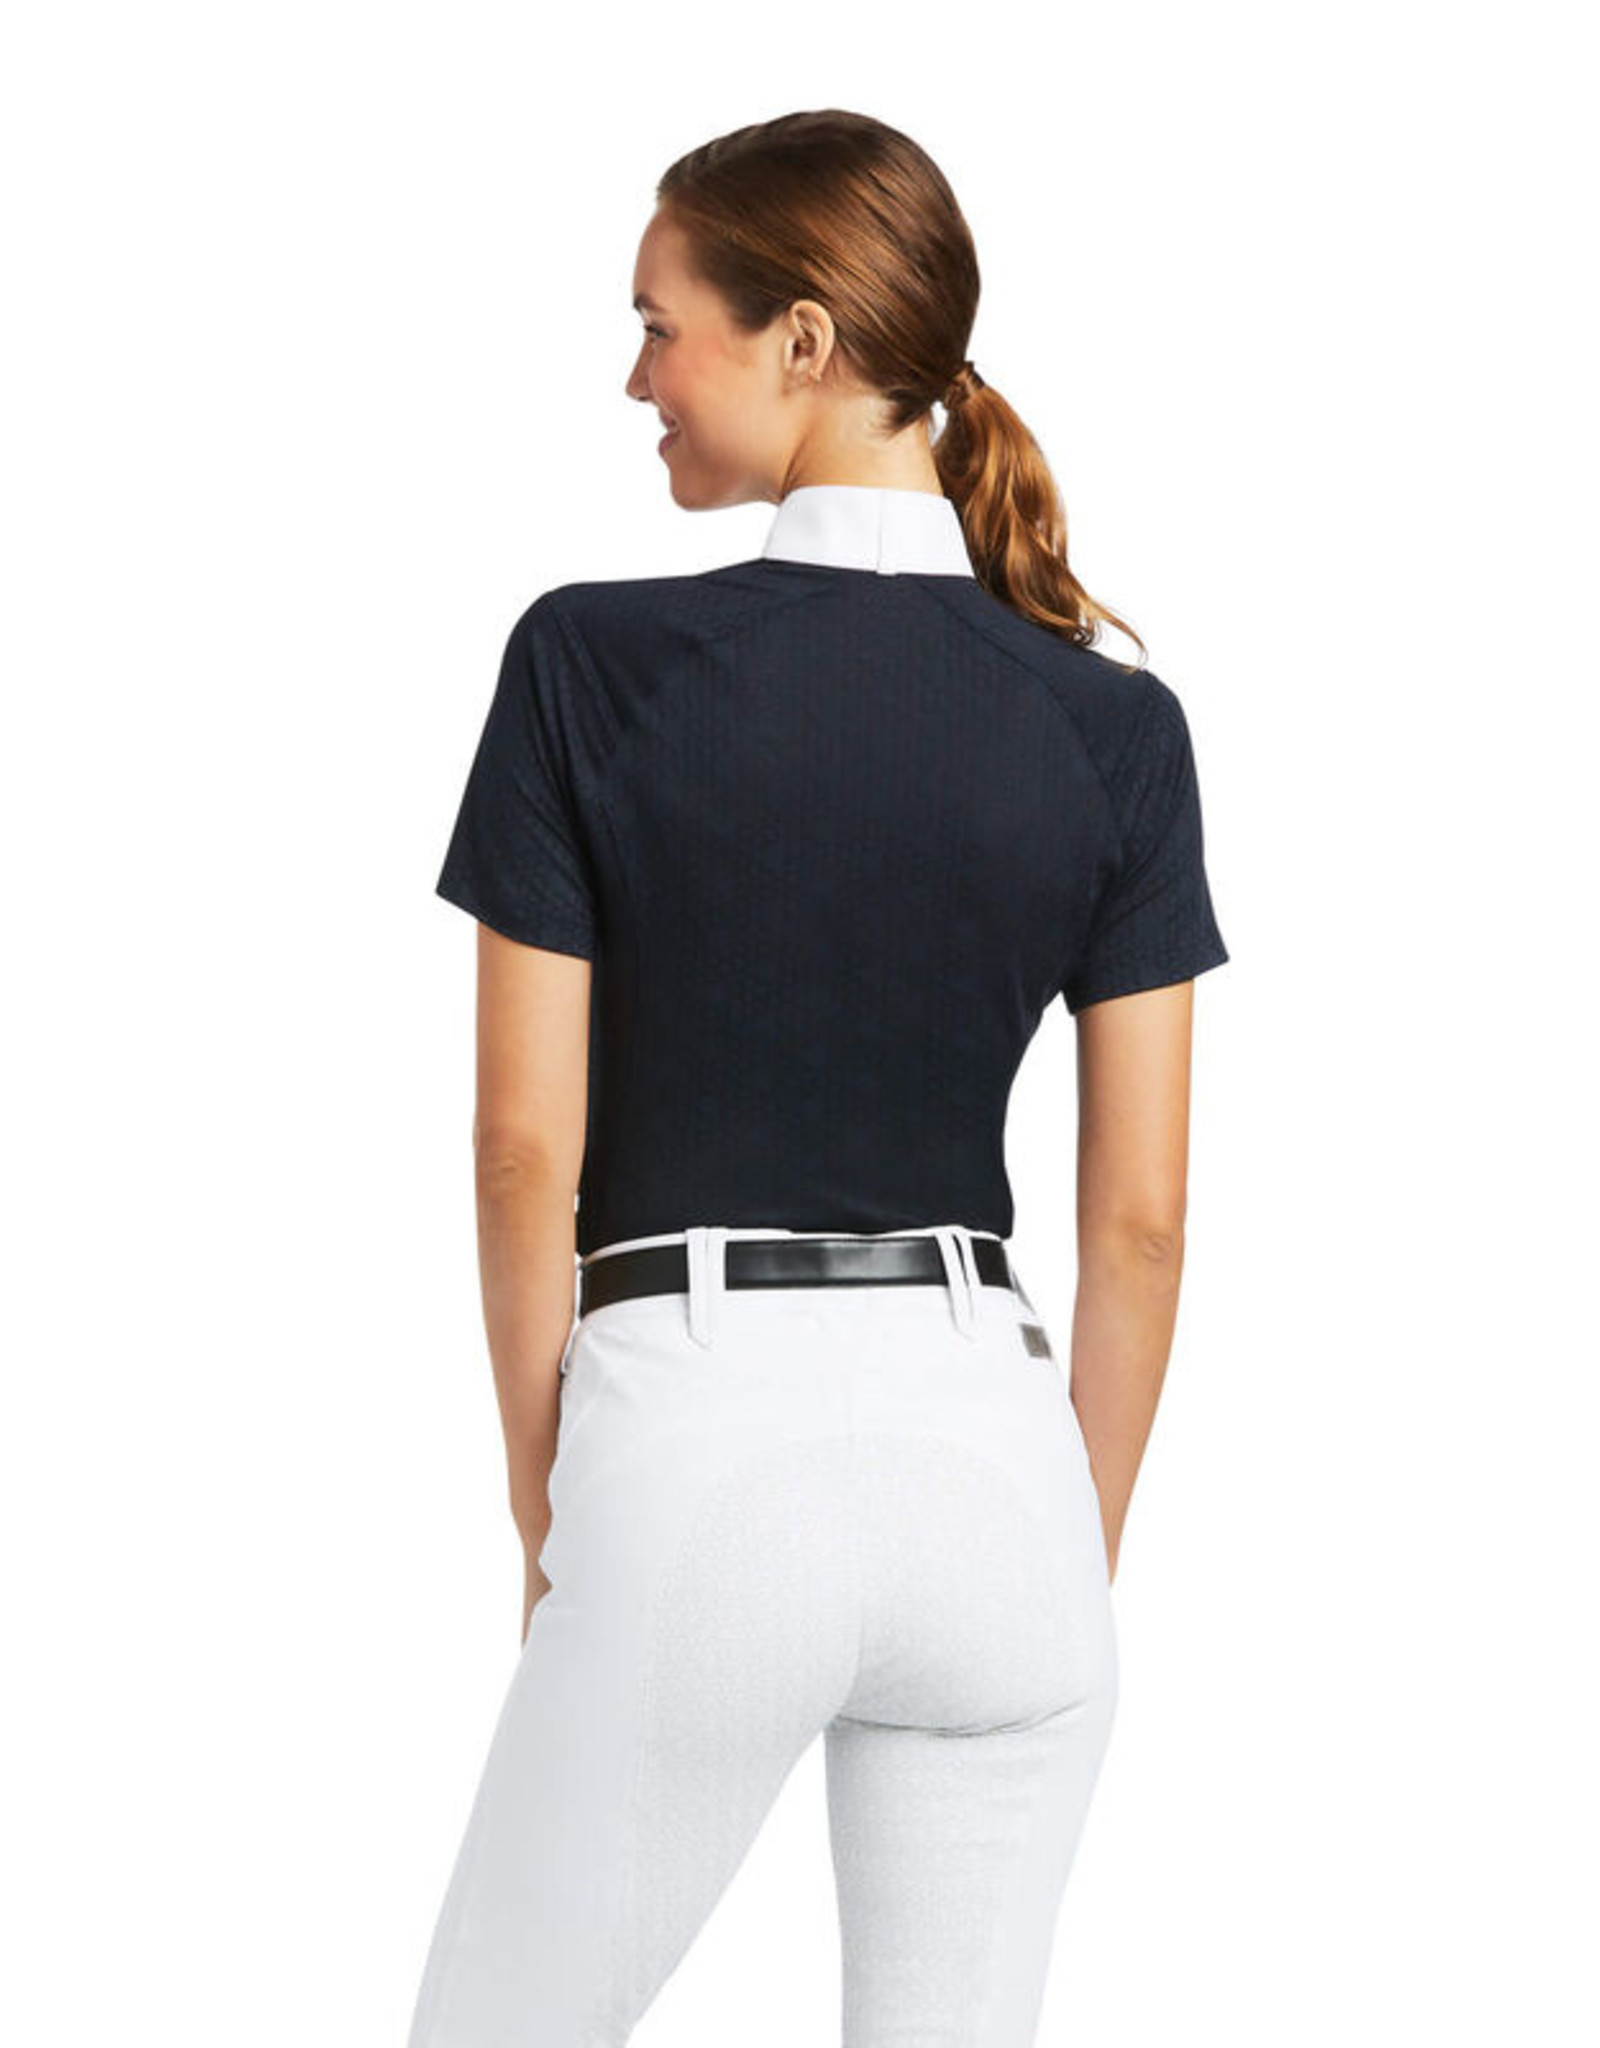 Ariat Ladies' Showstopper Show Shirt